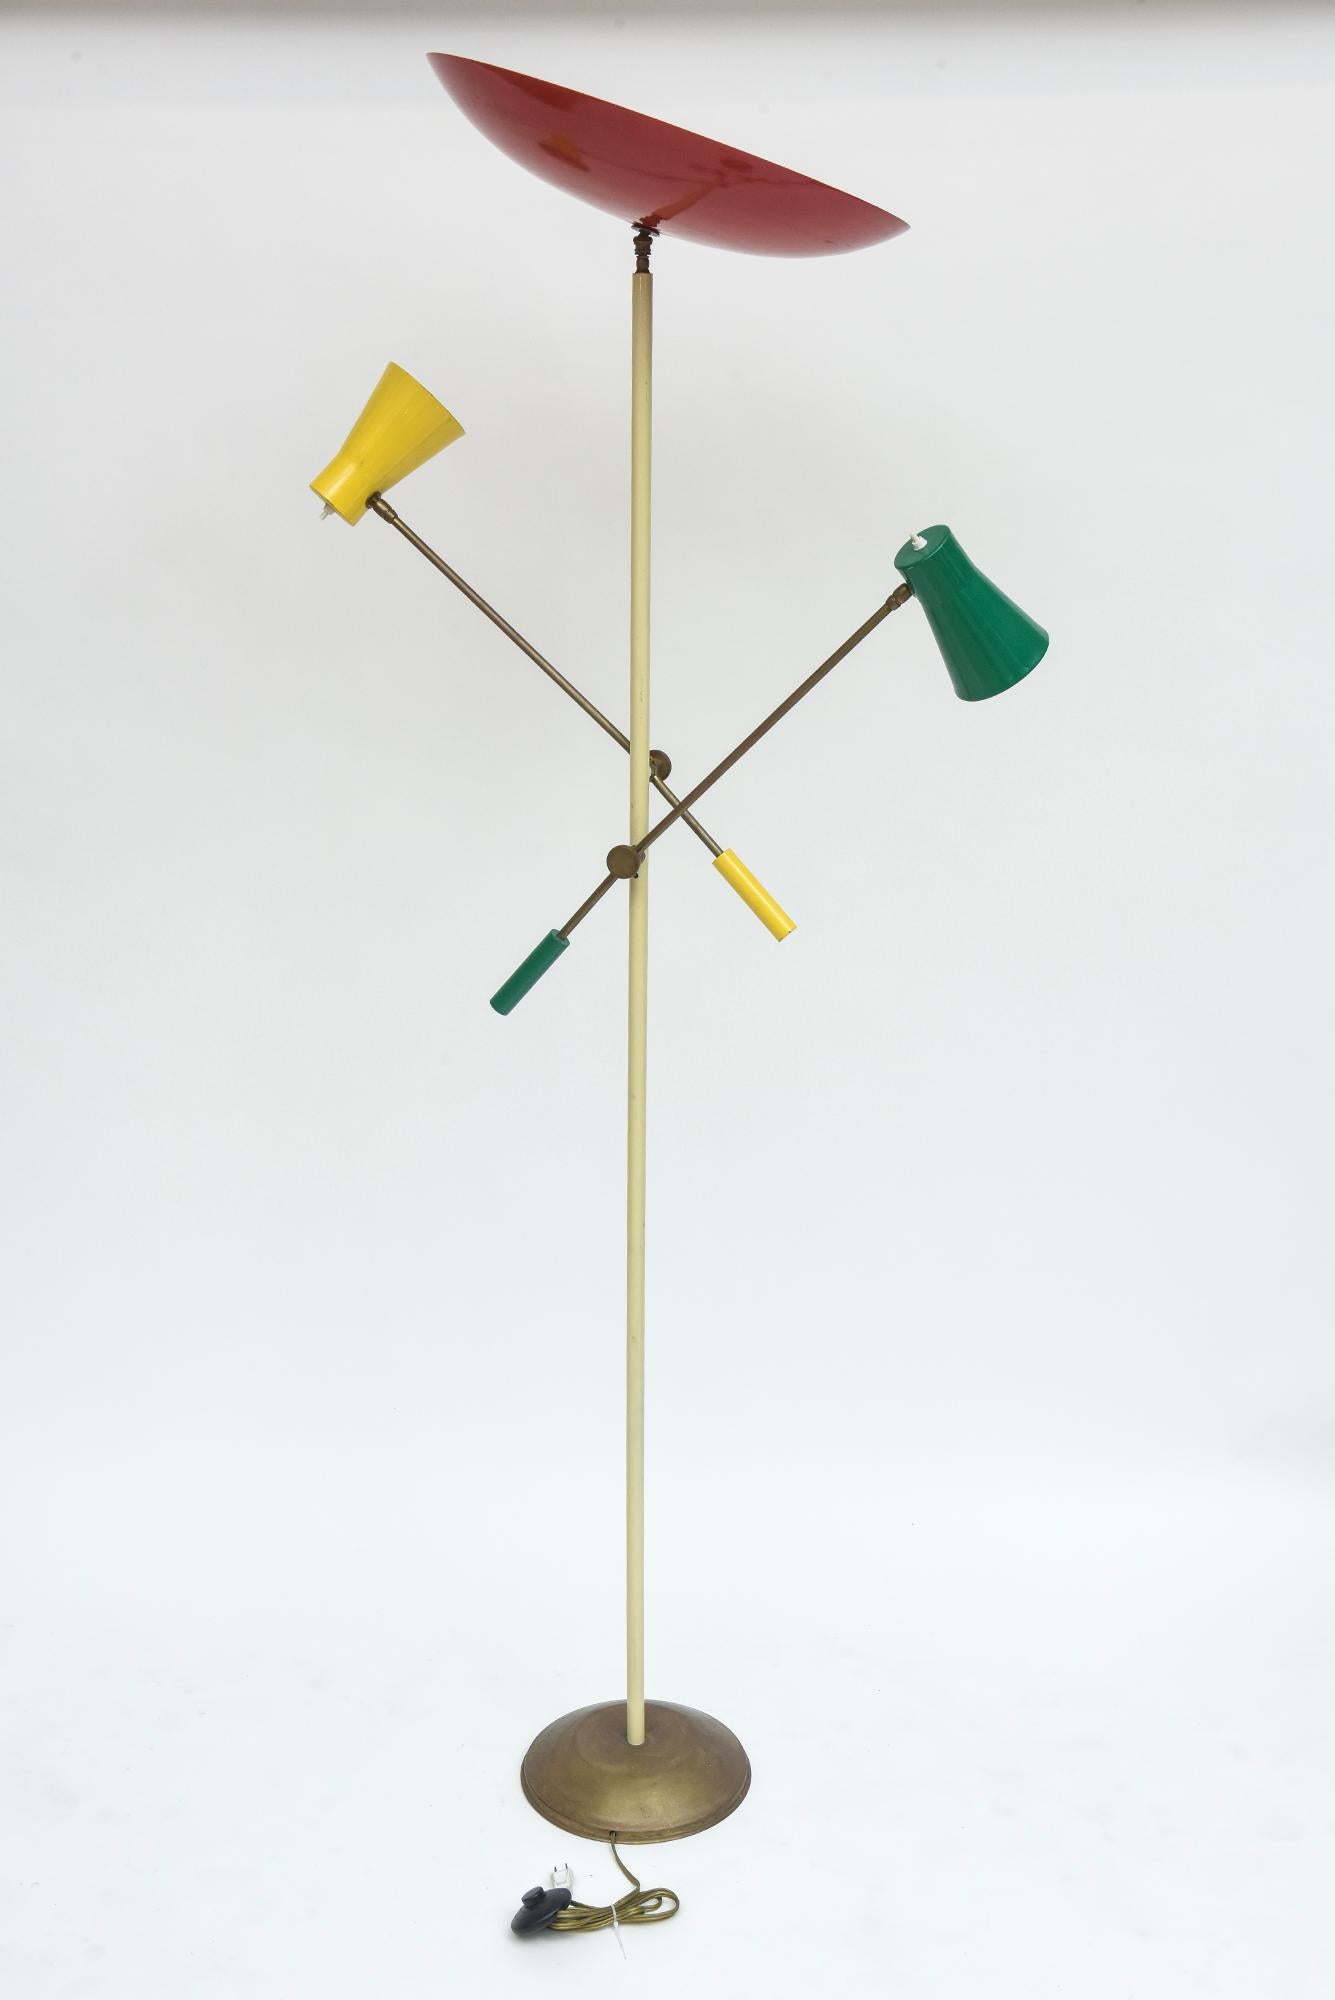 1950s Italian floor lamp with two adjustable brass arms and enamel painted shades that swivel to aim light where needed. The disc-shaped reflector at the top measures 19